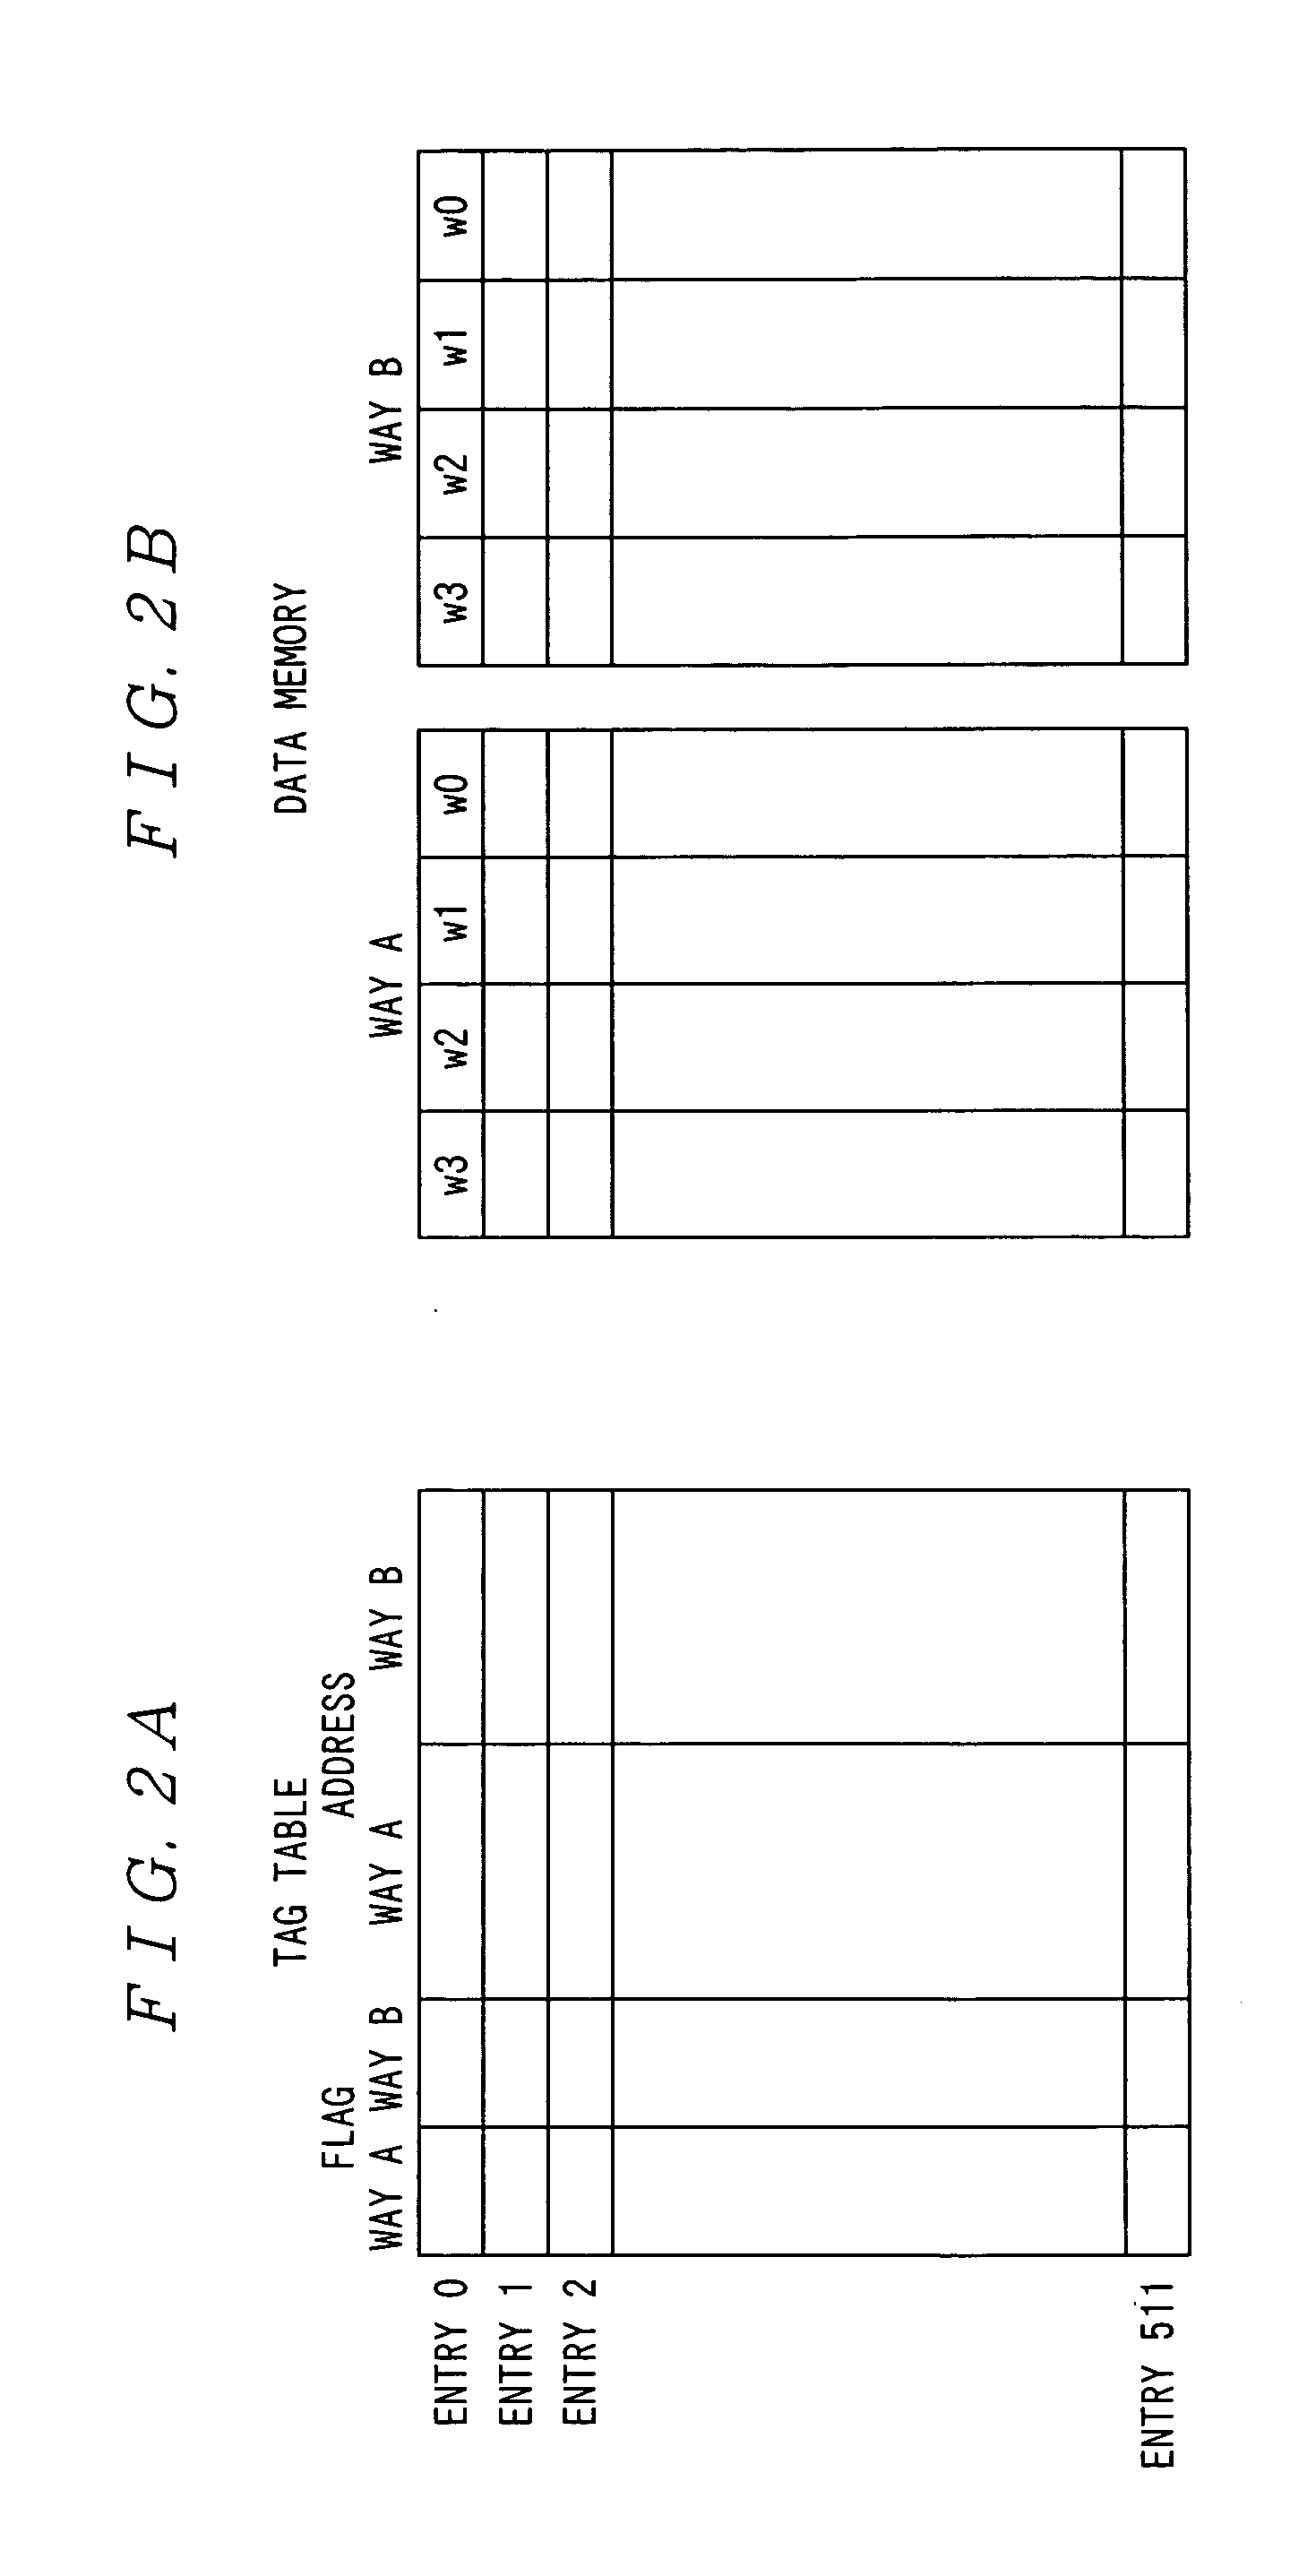 Cache memory controlling apparatus, information processing apparatus and method for control of cache memory